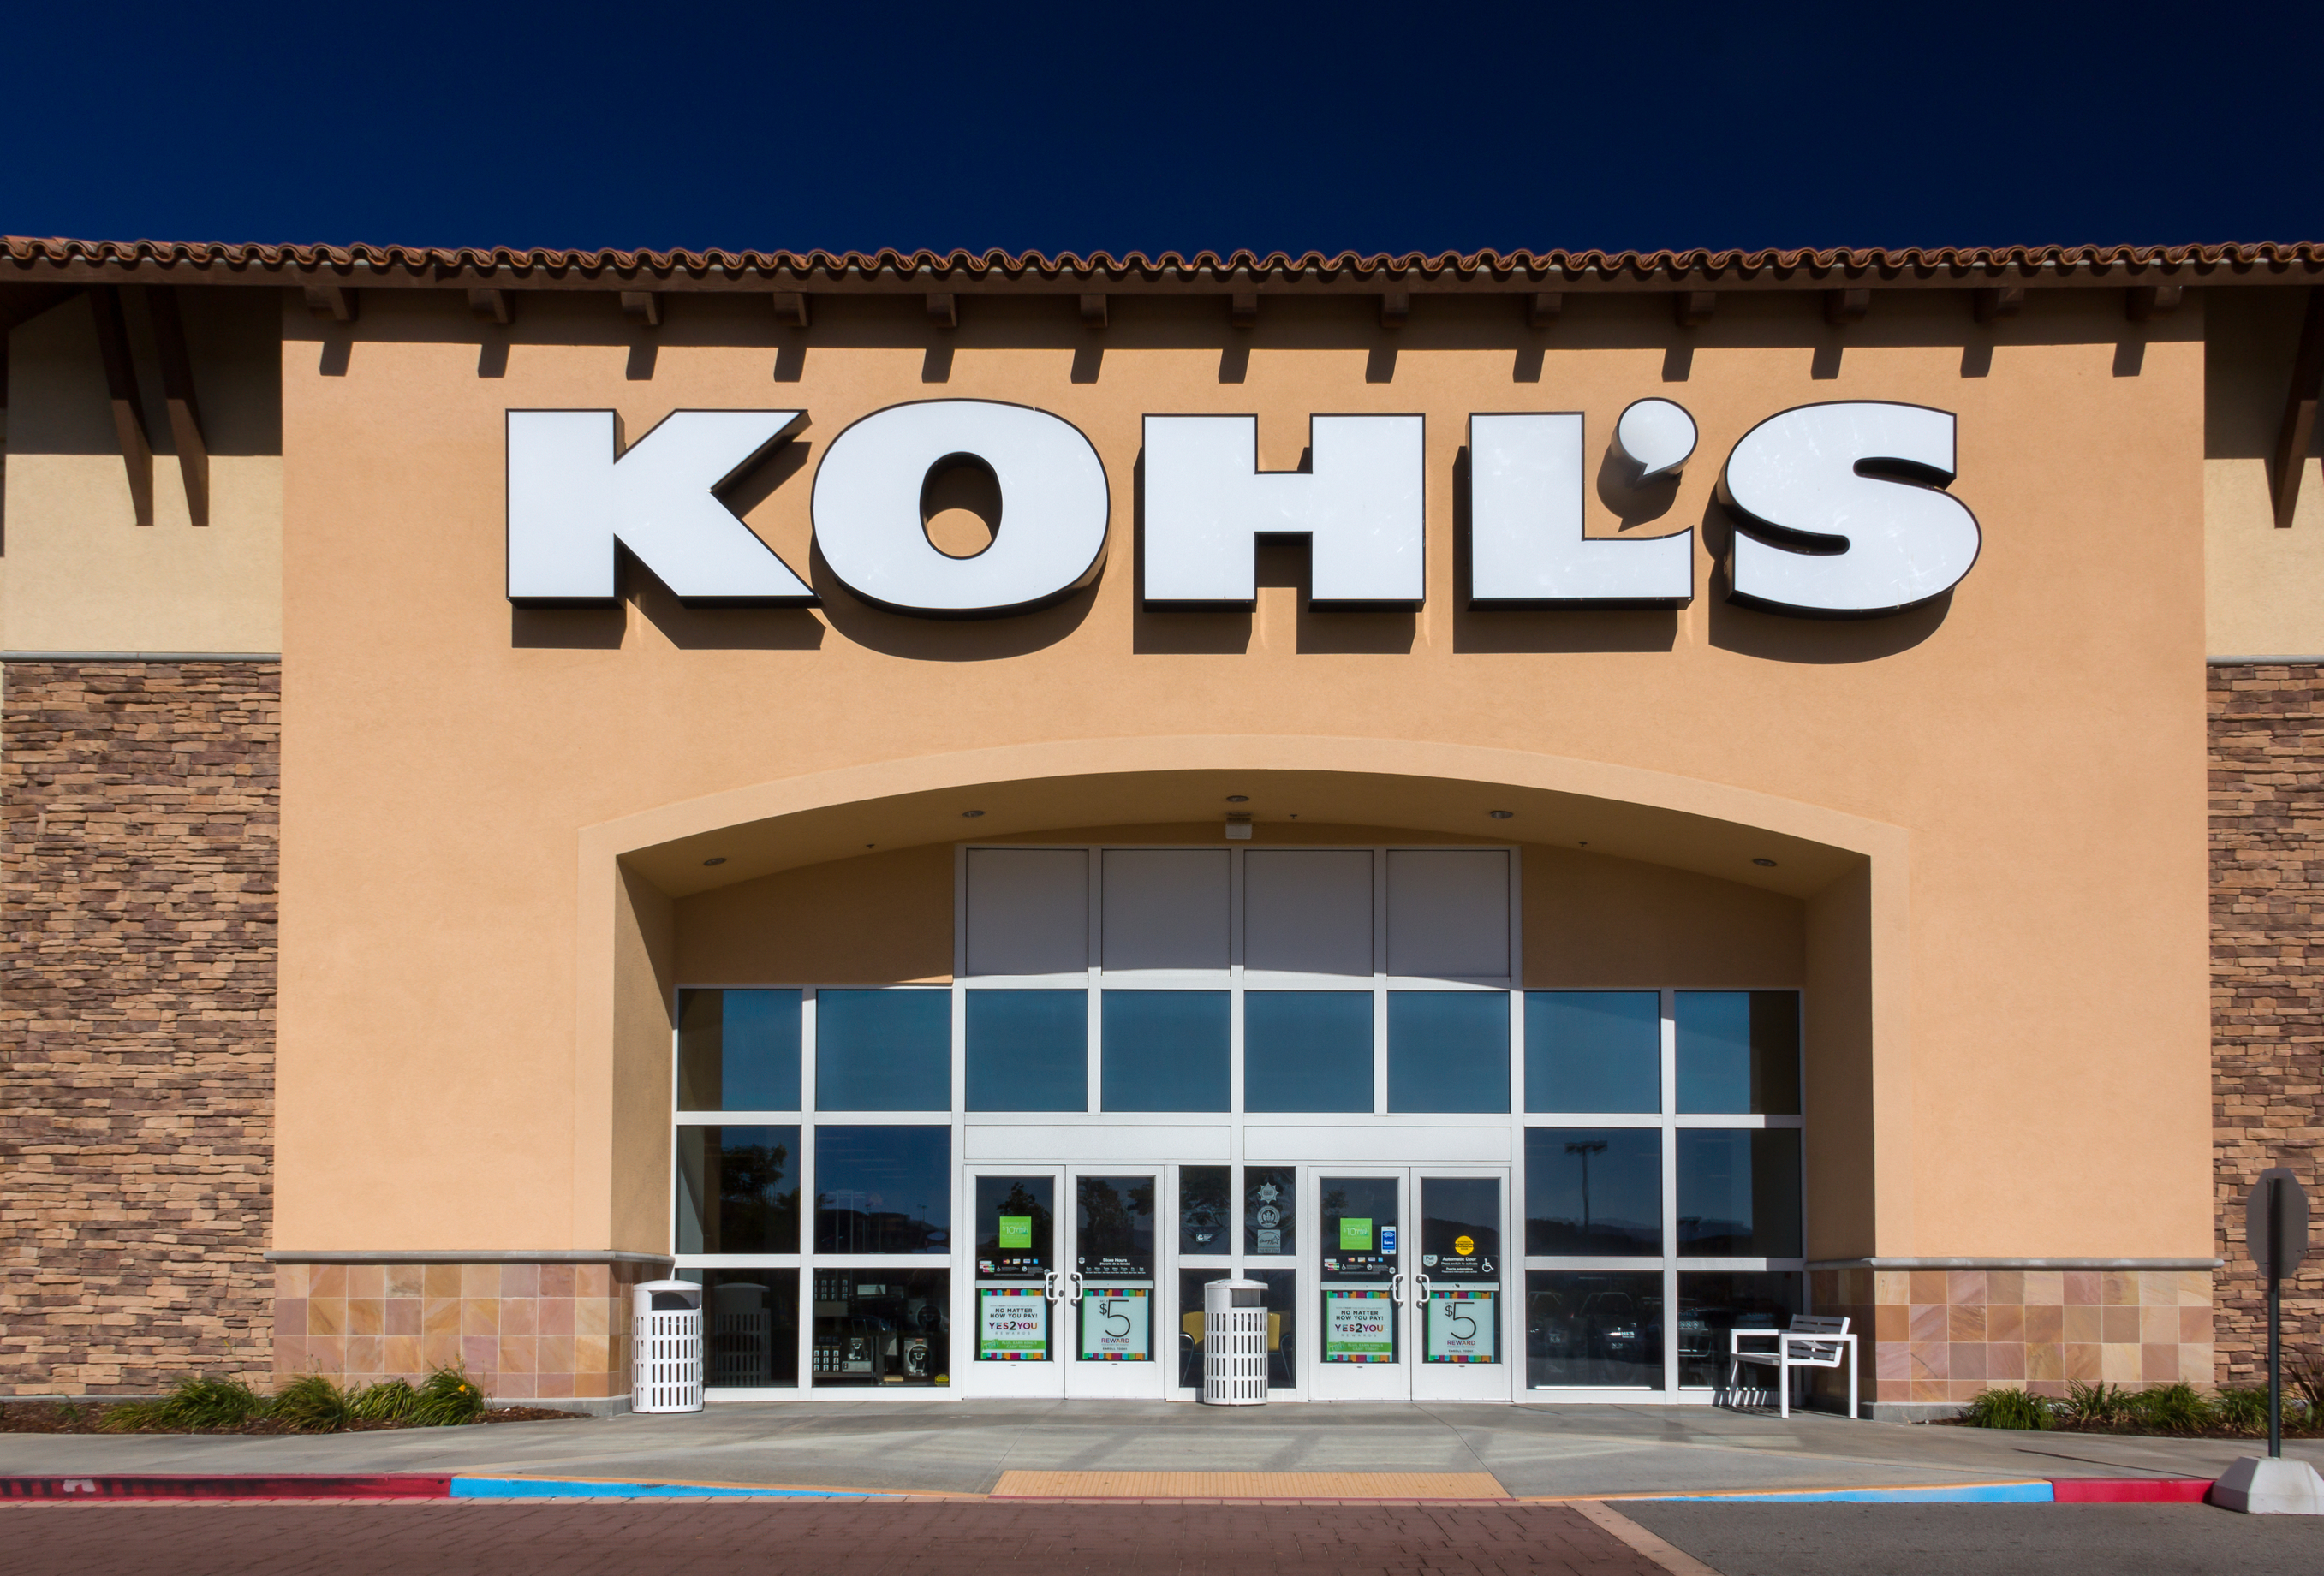 12 great deals for Kohl’s cardholders right now, plus free shipping!